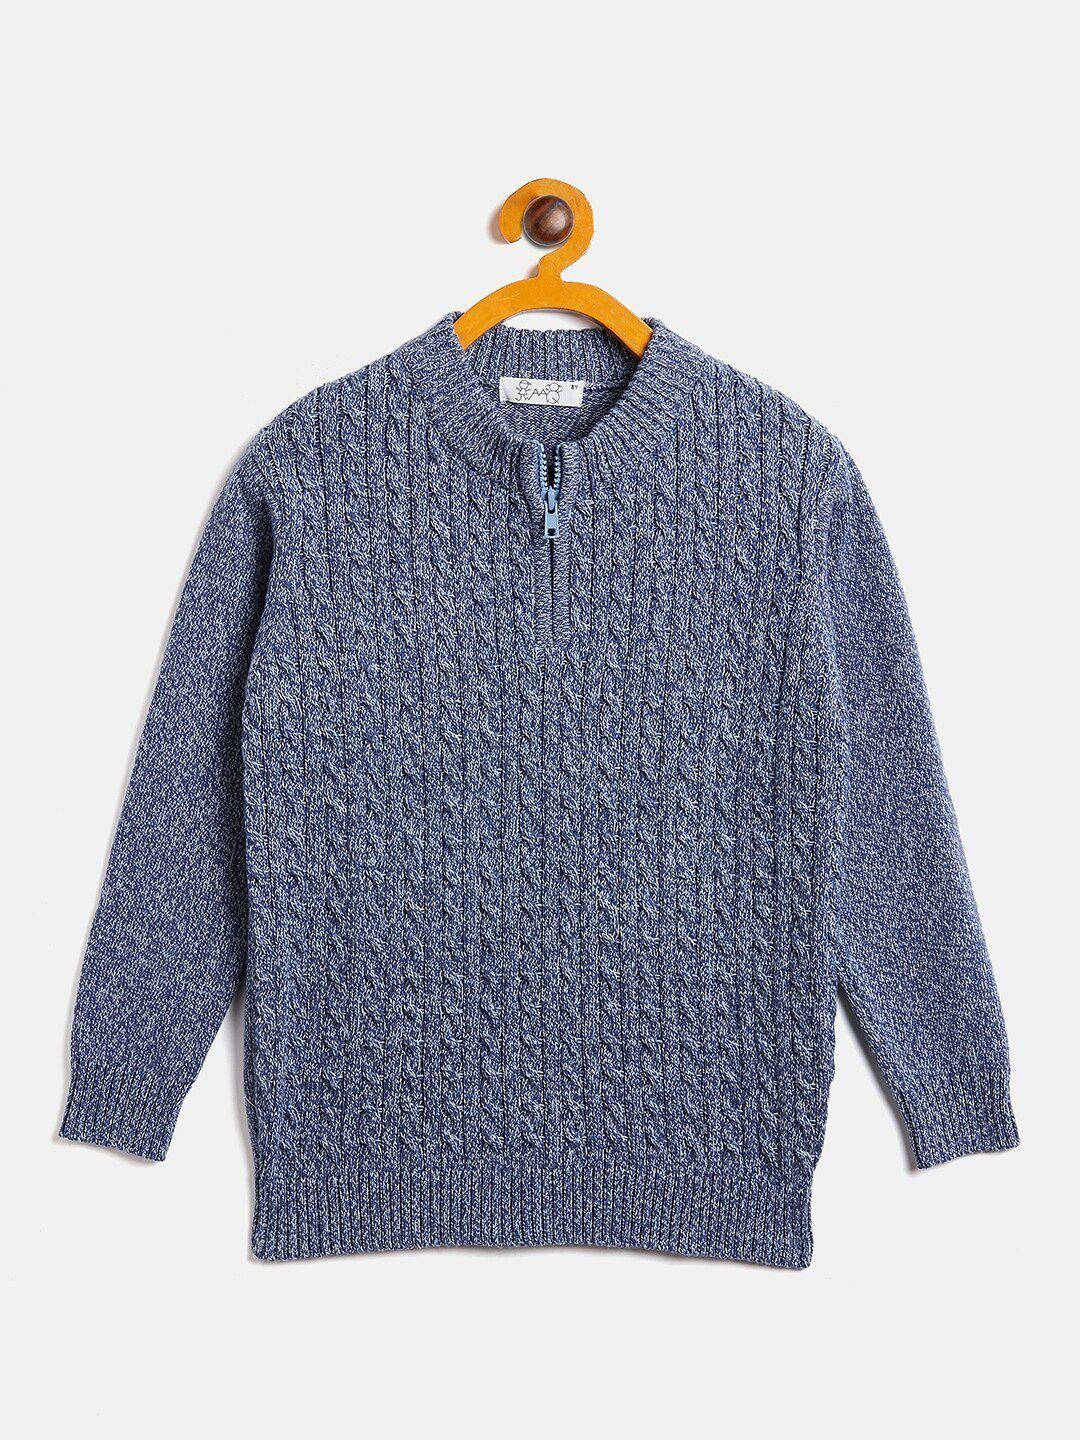 jwaaq boys cable knit pullover